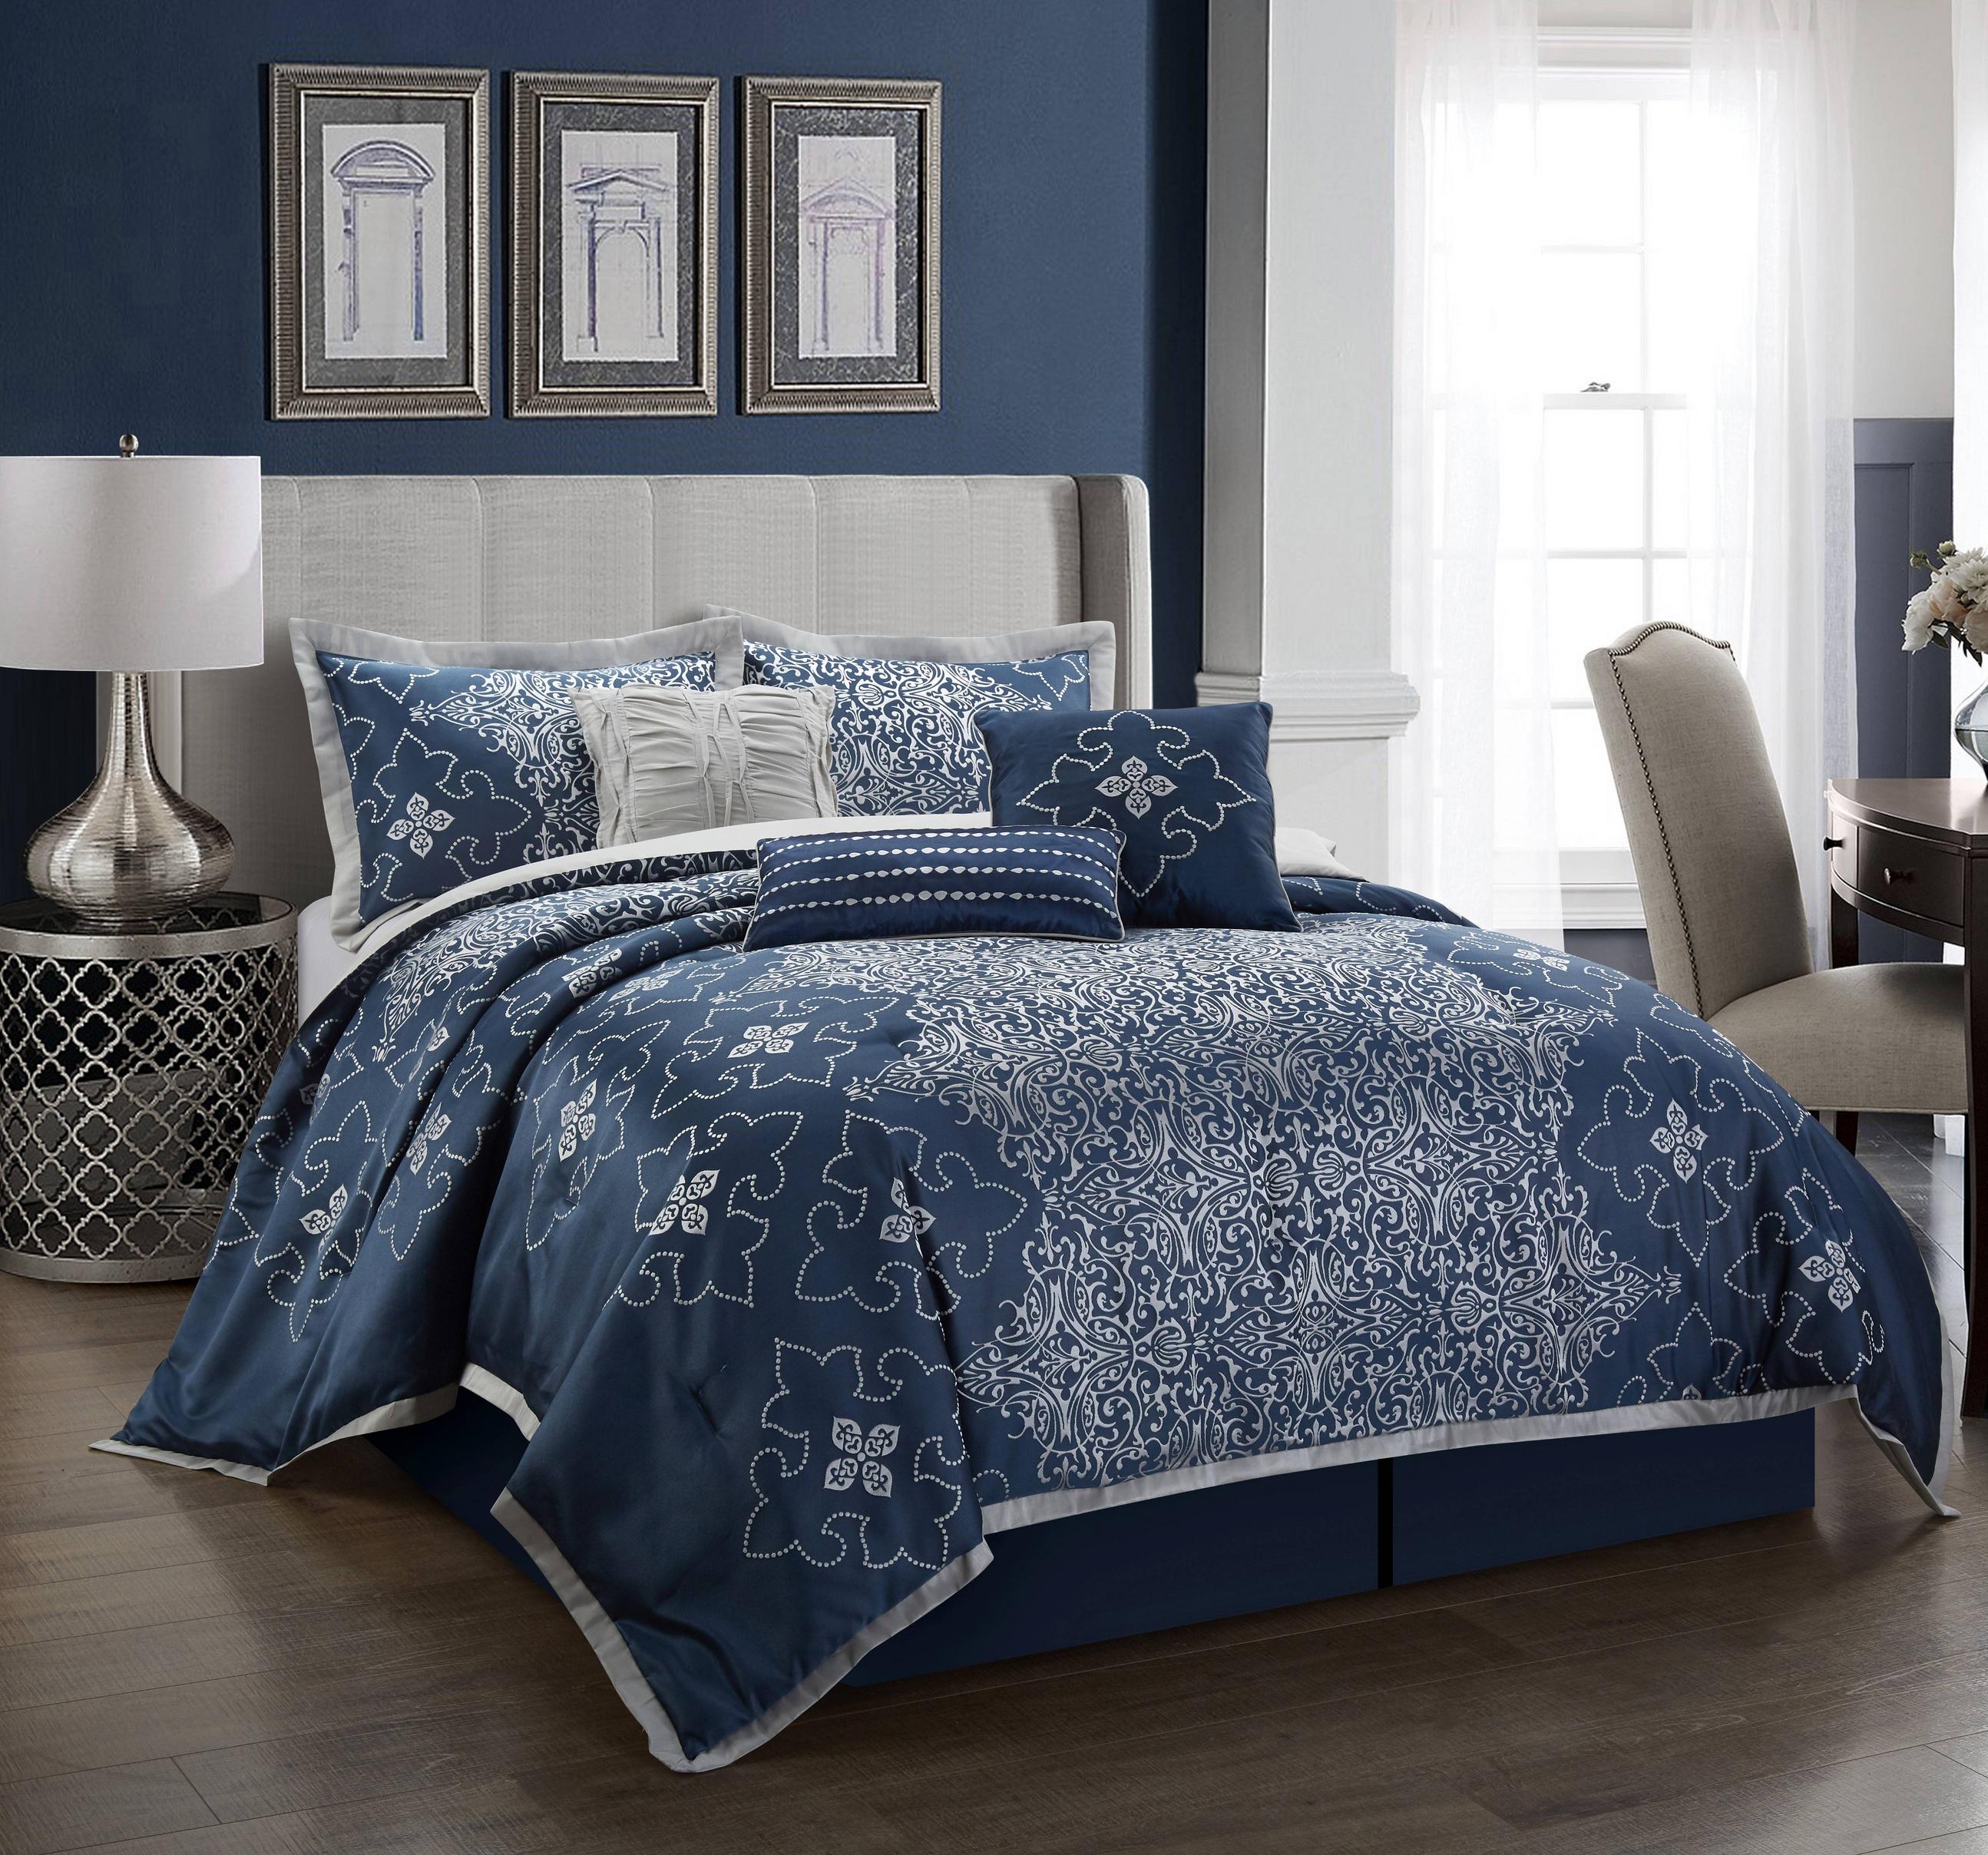 Hig 7 Pieces Blue Quilting Luxury Retro Style Comforter Set-Queen King Size - Queen 90x90in